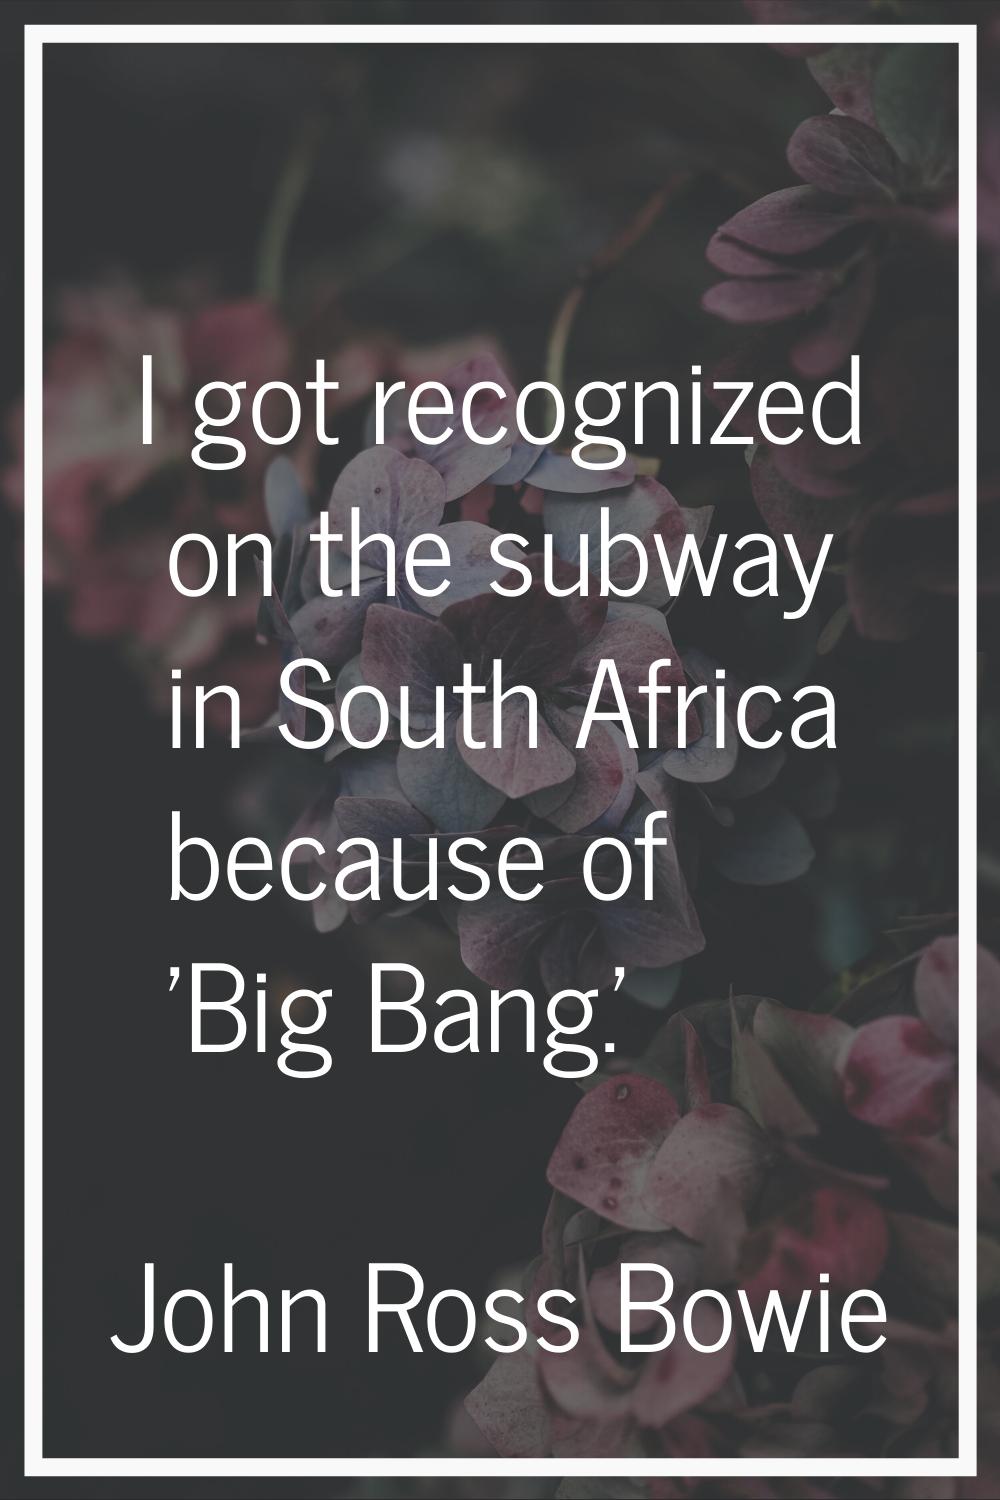 I got recognized on the subway in South Africa because of 'Big Bang.'